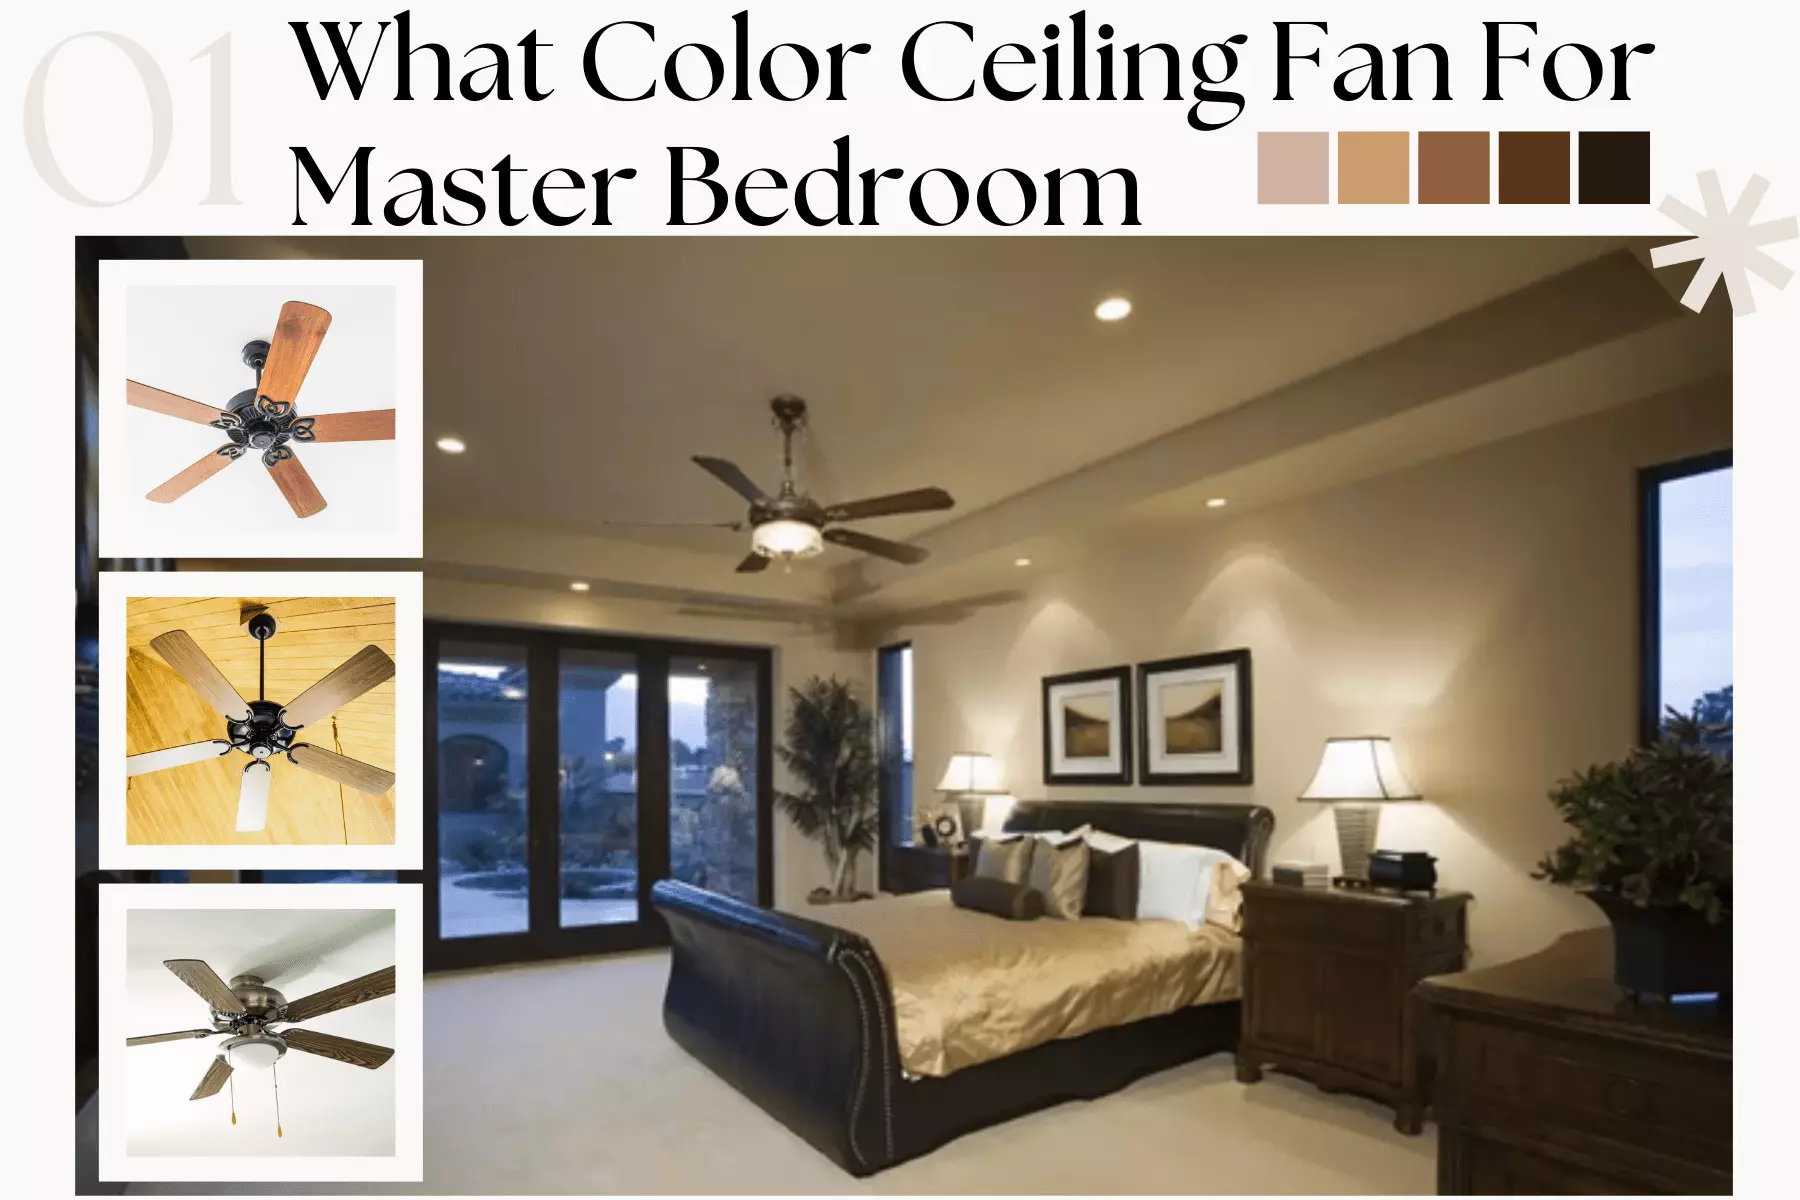 What color ceiling fan for master bedroom Does It Matter